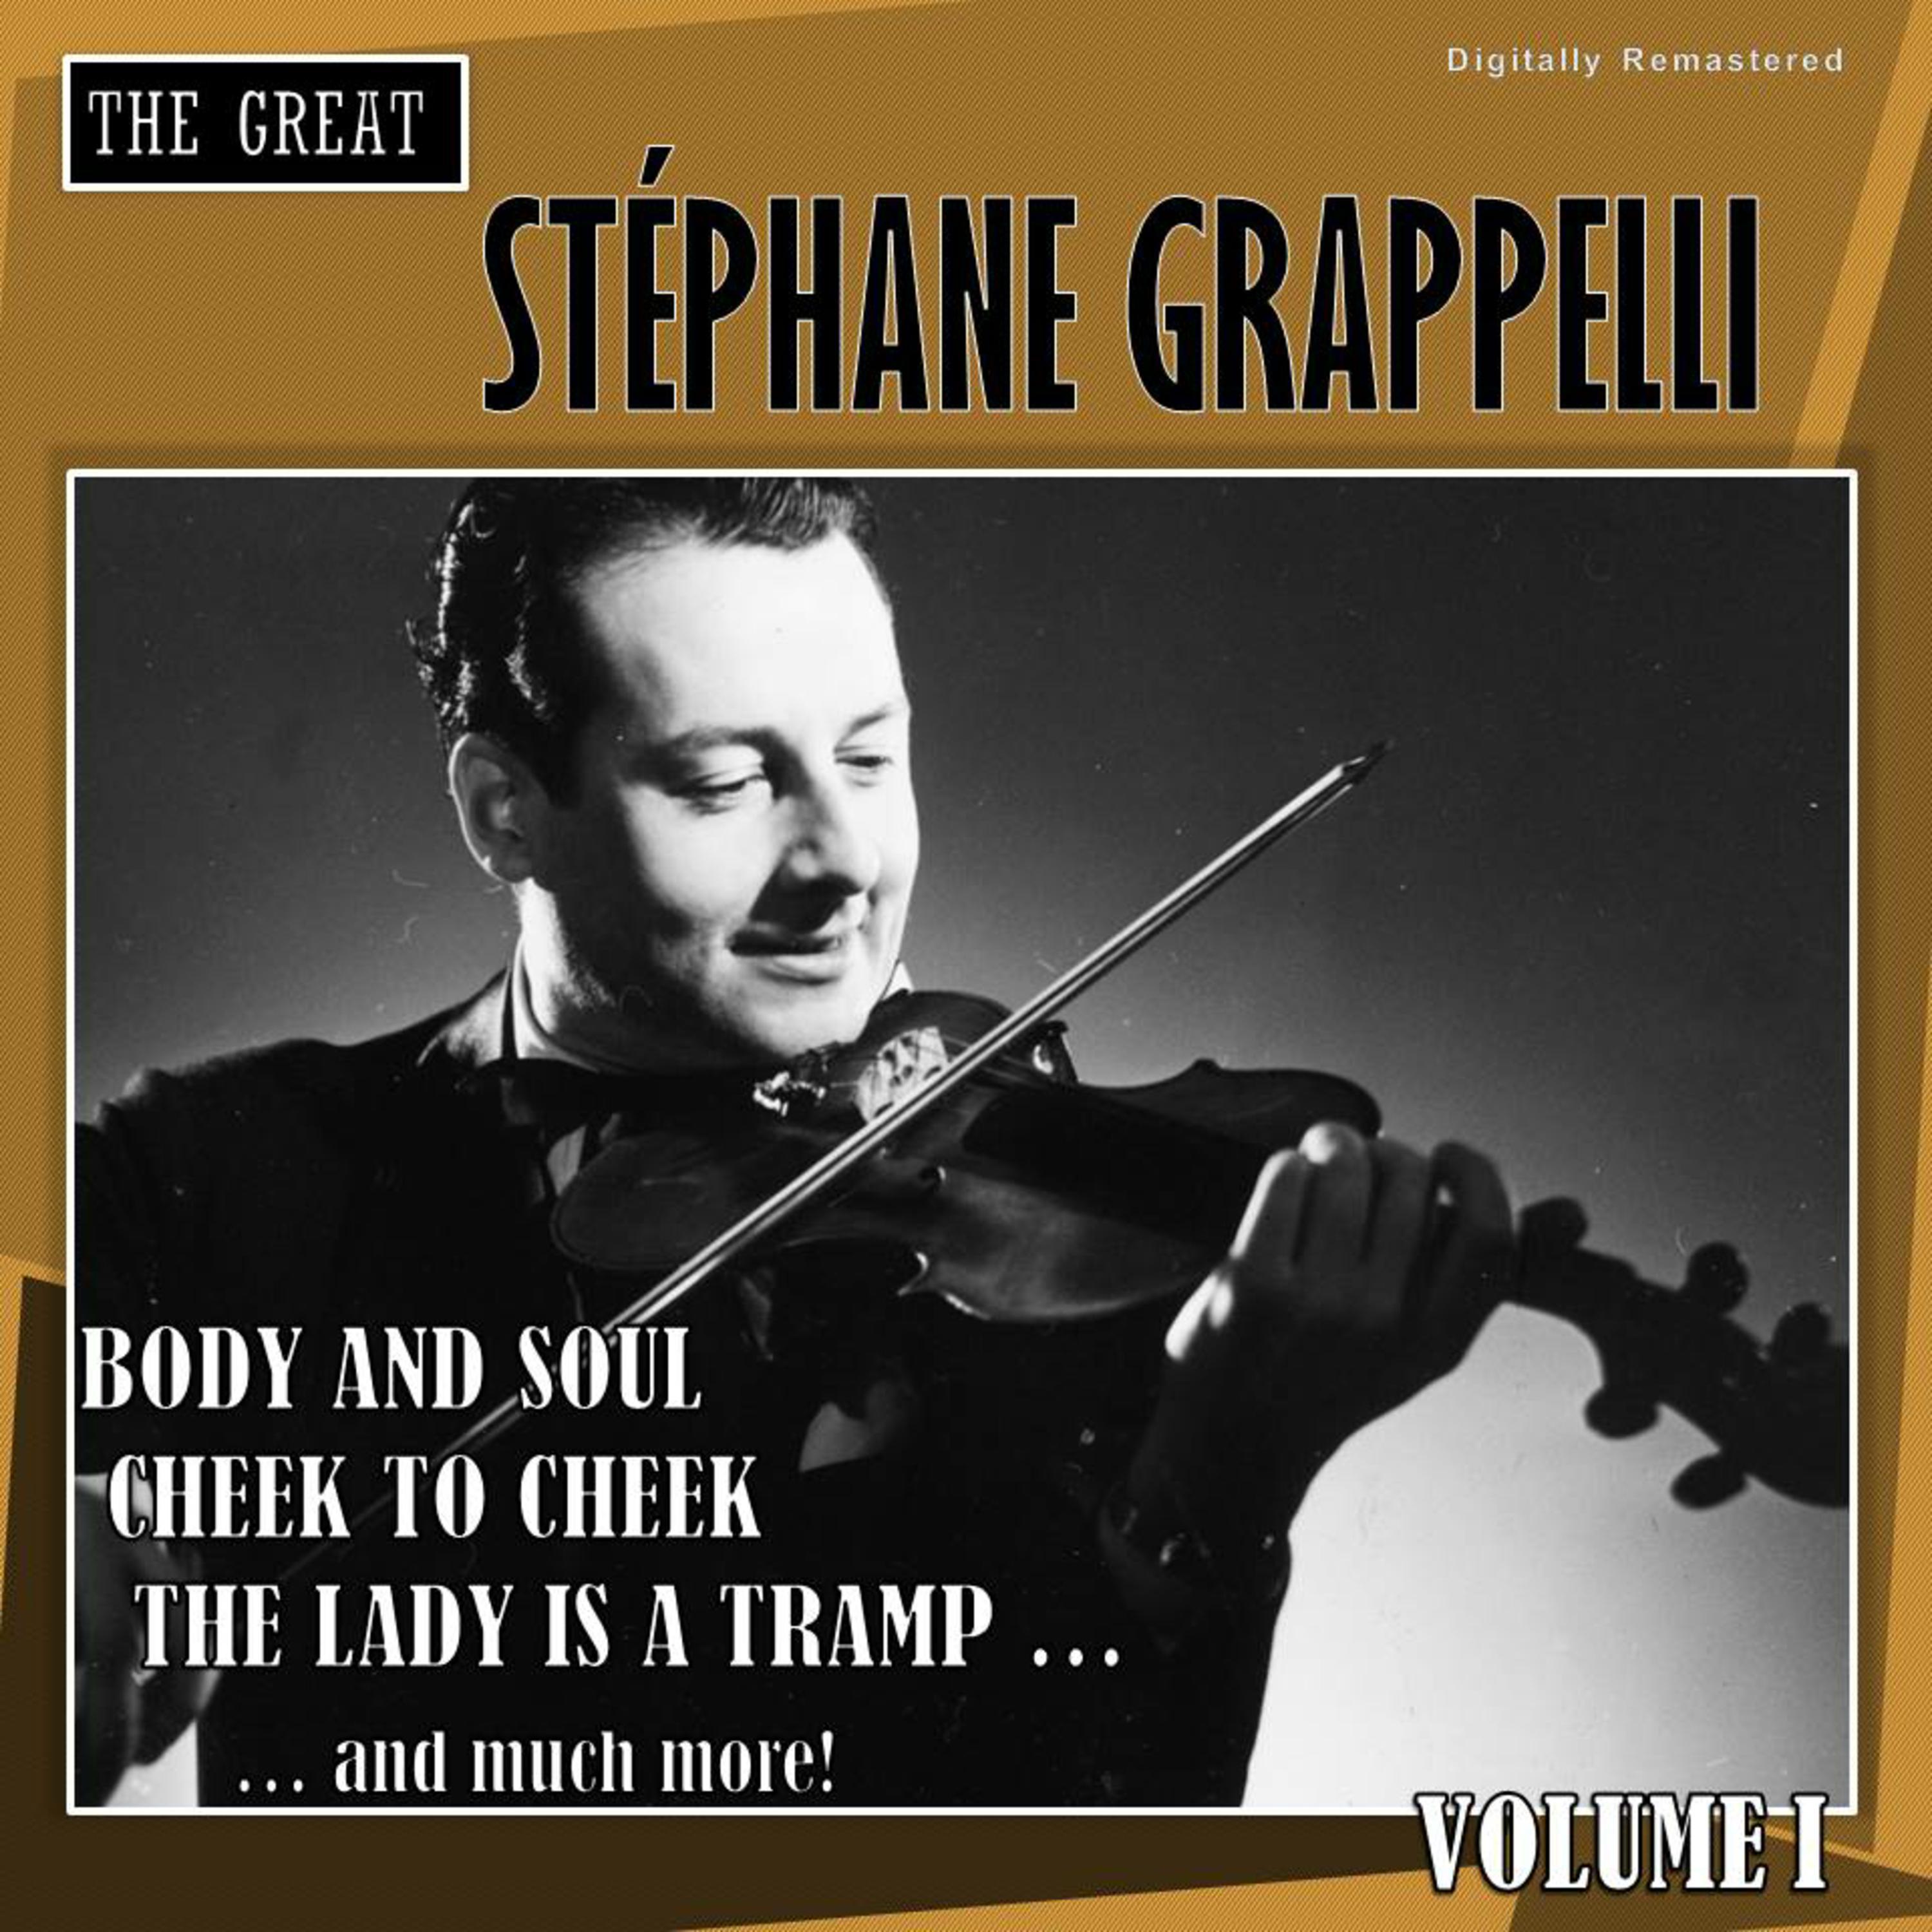 The Great Ste phane Grappelli, Vol. 1 Digitally Remastered